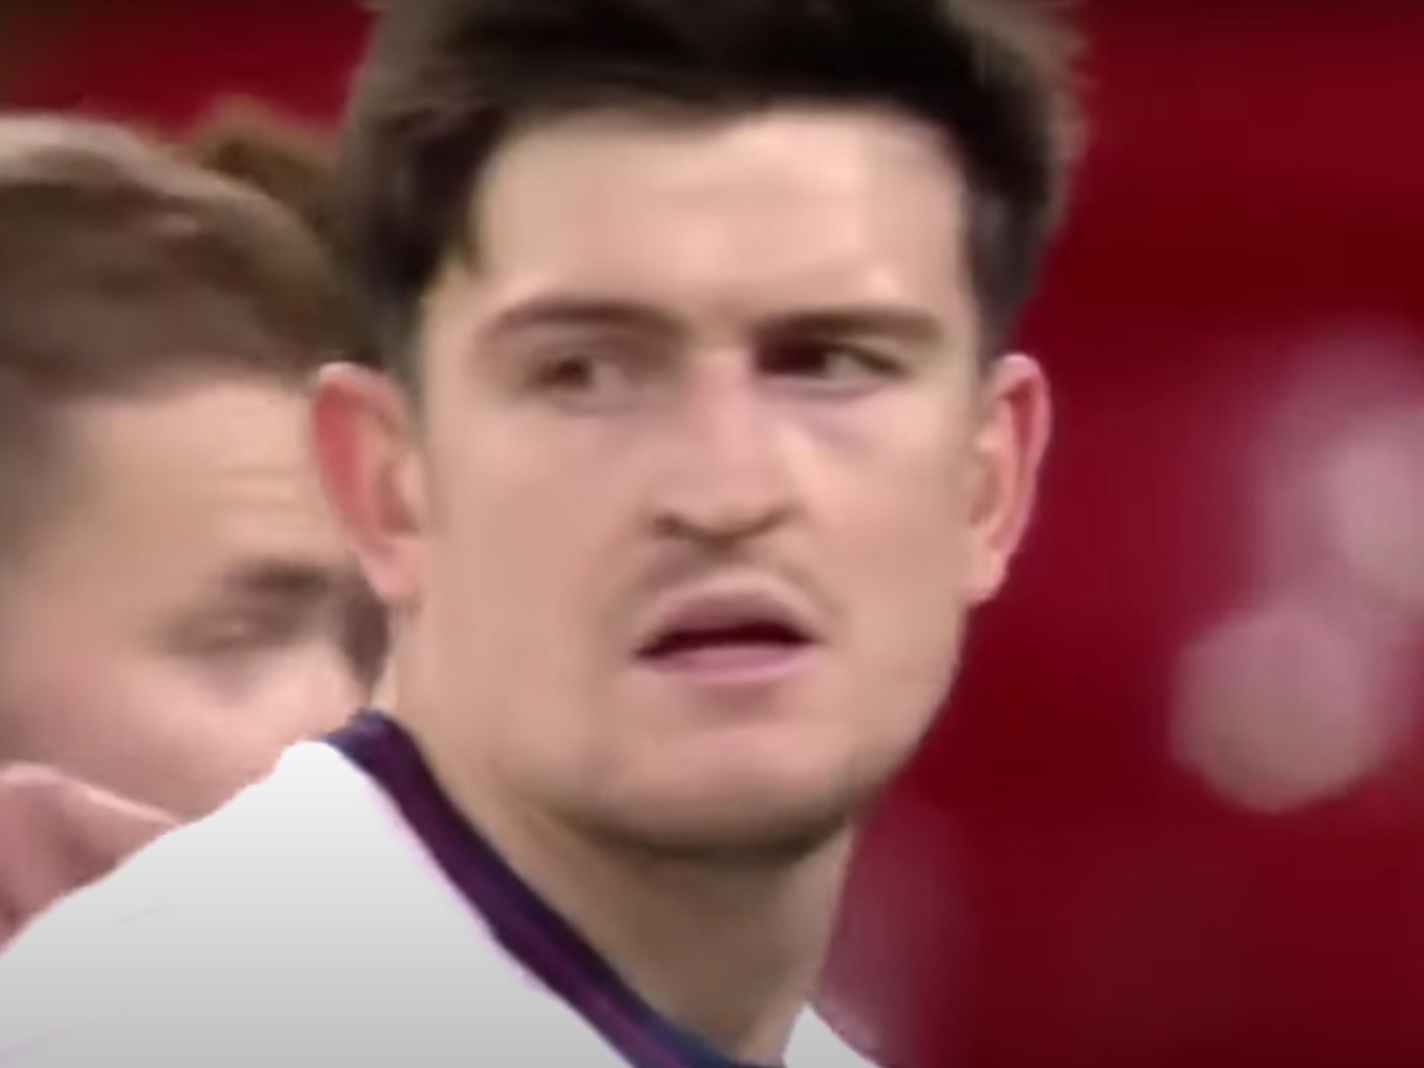 England fans boo Harry Maguire as his name is read out loud